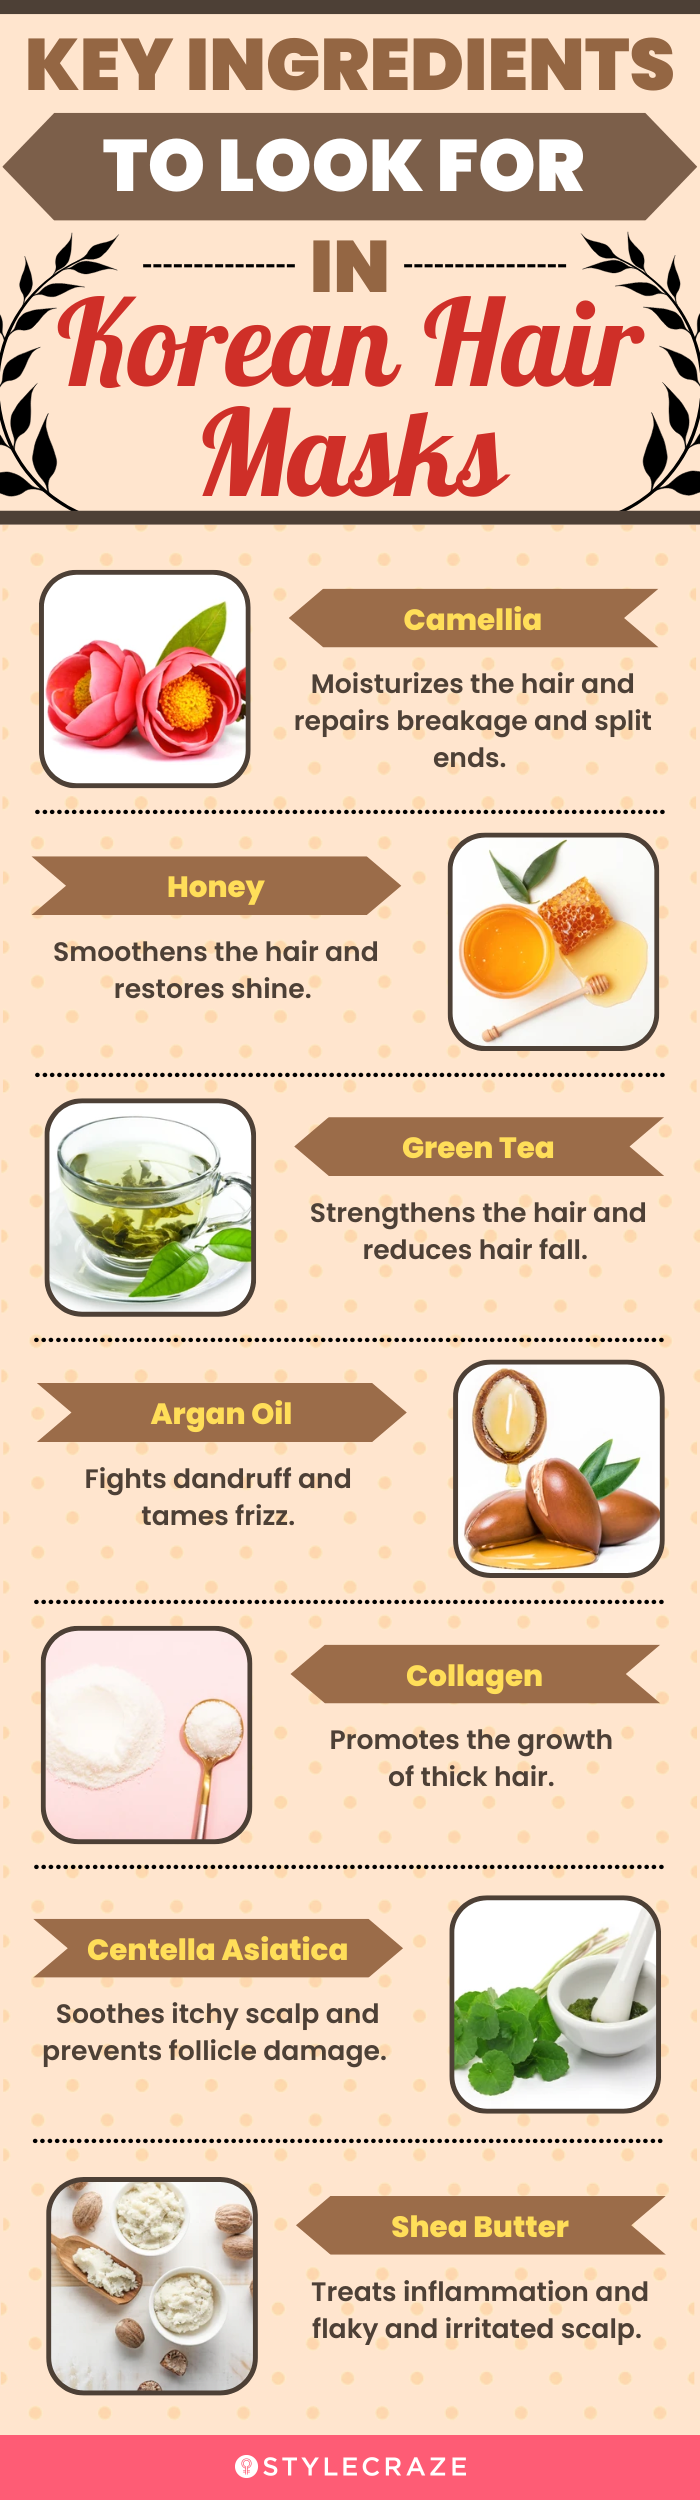 Key Ingredients To Look For In Korean Hair Masks (infographic)